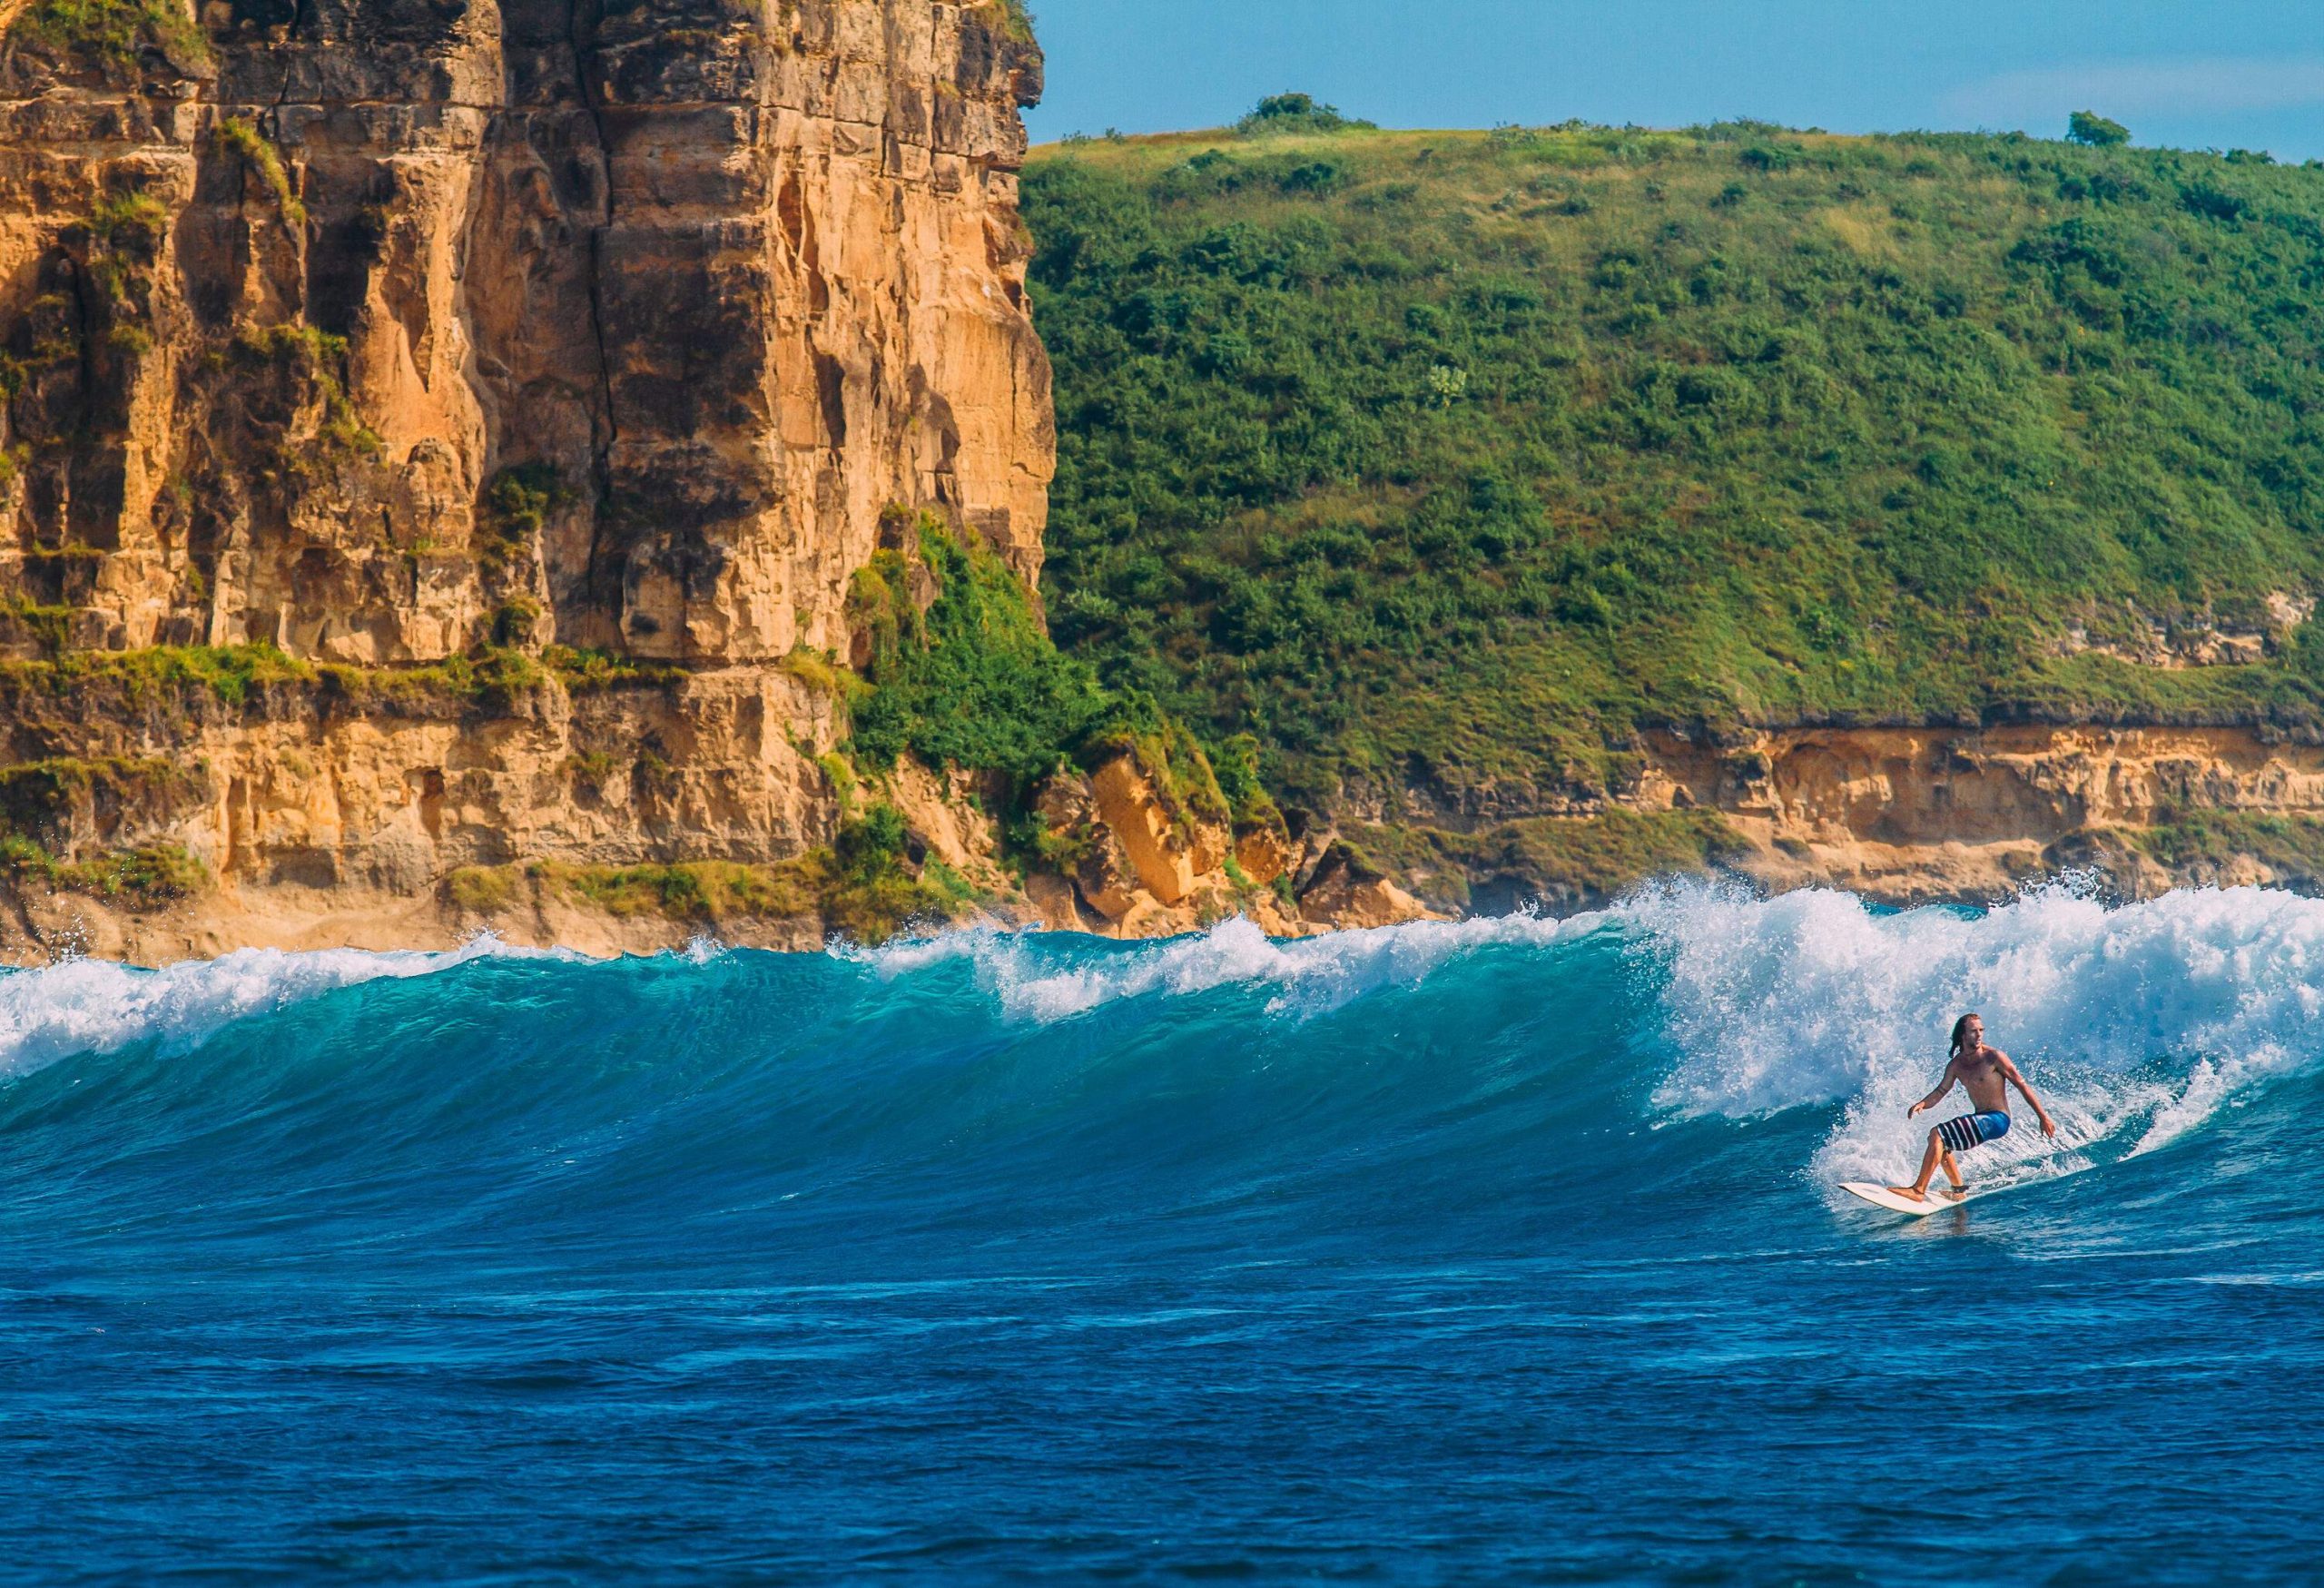 A surfer rides a big wave against a backdrop of a steep cliff and forested hills.